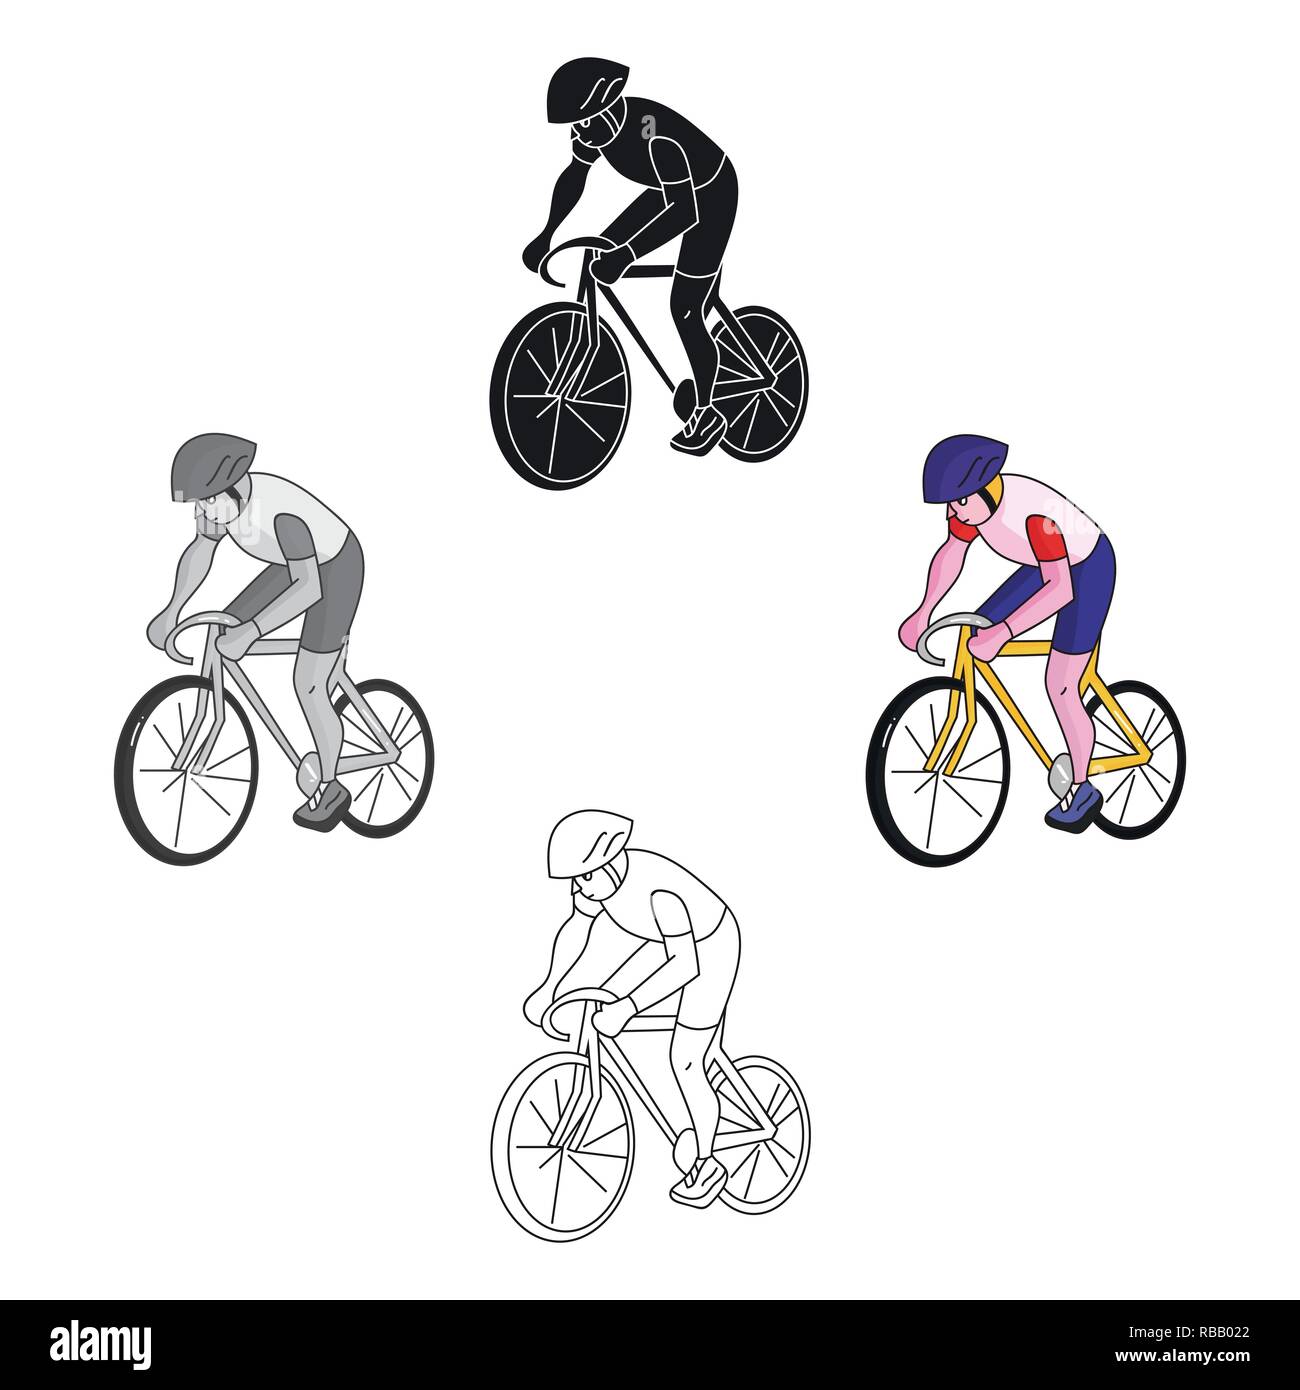 art,athlete,bicycle,bike,biker,cartoon,clip,competition,cycle,cycling,cyclist,field,games,graphic,helmet,icon,illustration,isolated,lane,logo,man,motion,object,olympic,people,person,race,riding,road,sign,silhouette,speed,sport,symbol,track,vector,web  ...